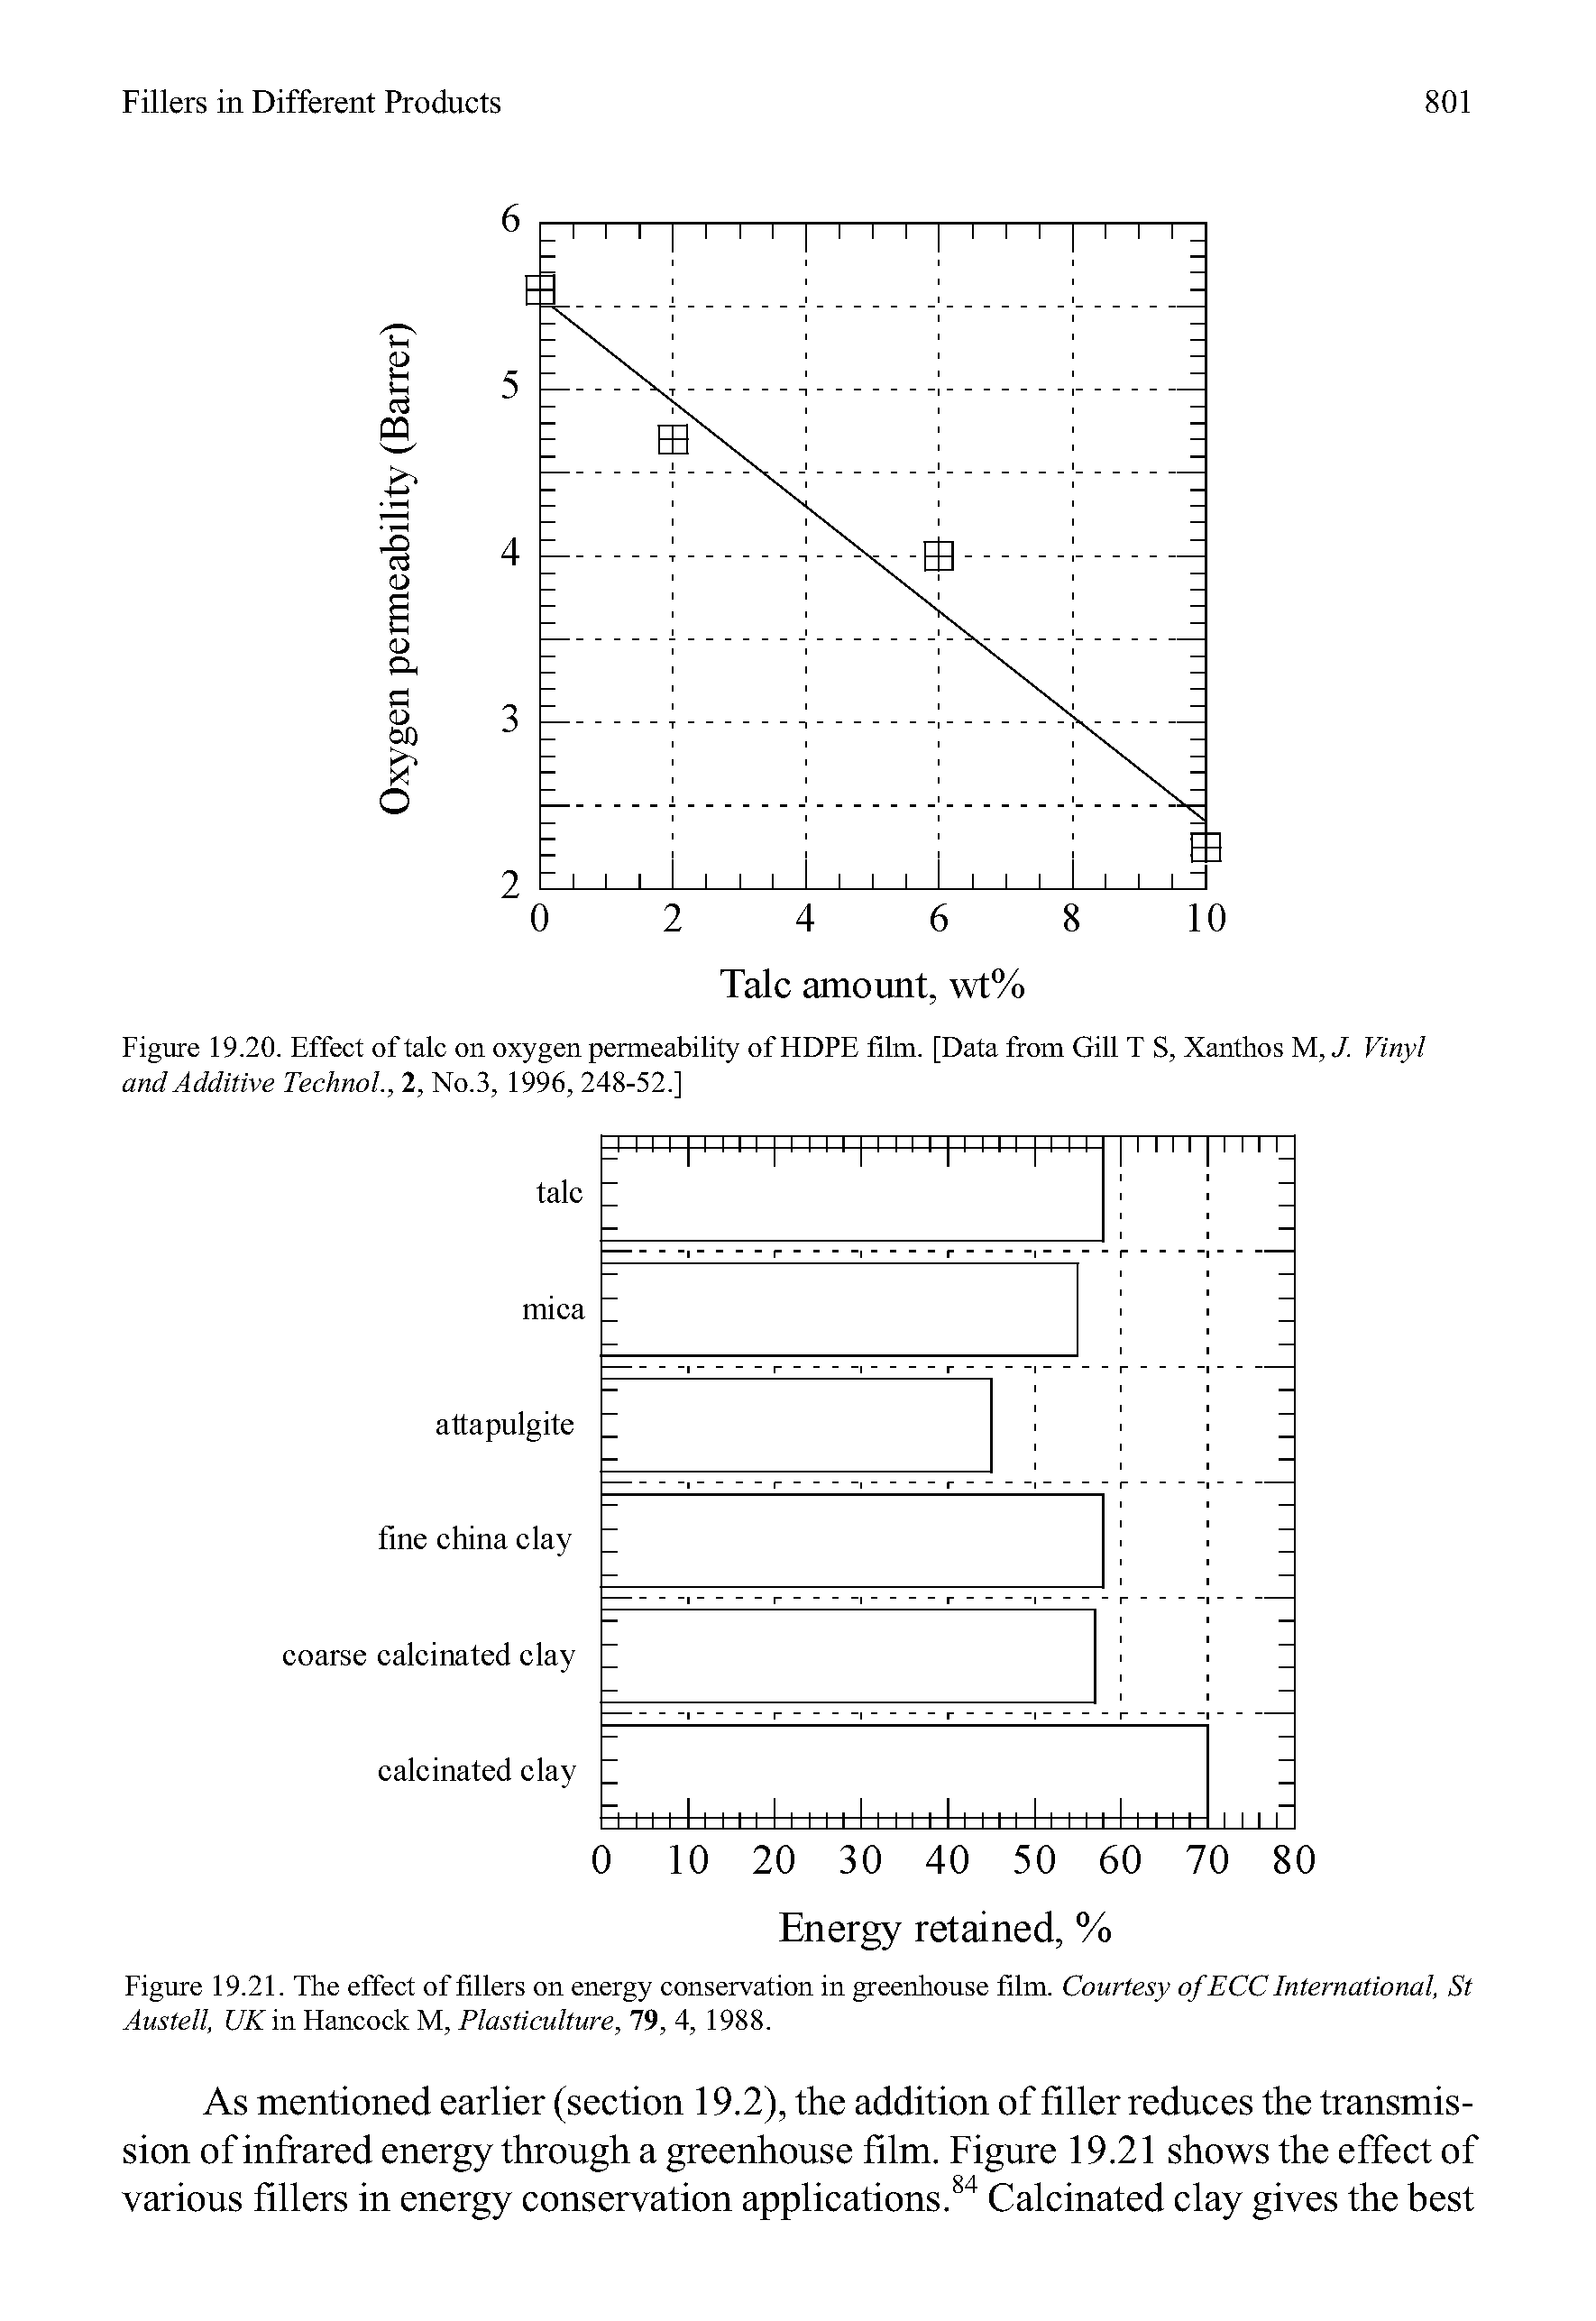 Figure 19.21. The effect of fillers on energy conservation in greenhouse film. Courtesy of ECC International, St Austell, UK in Hancock M, Plasticulture, 19, 4, 1988.